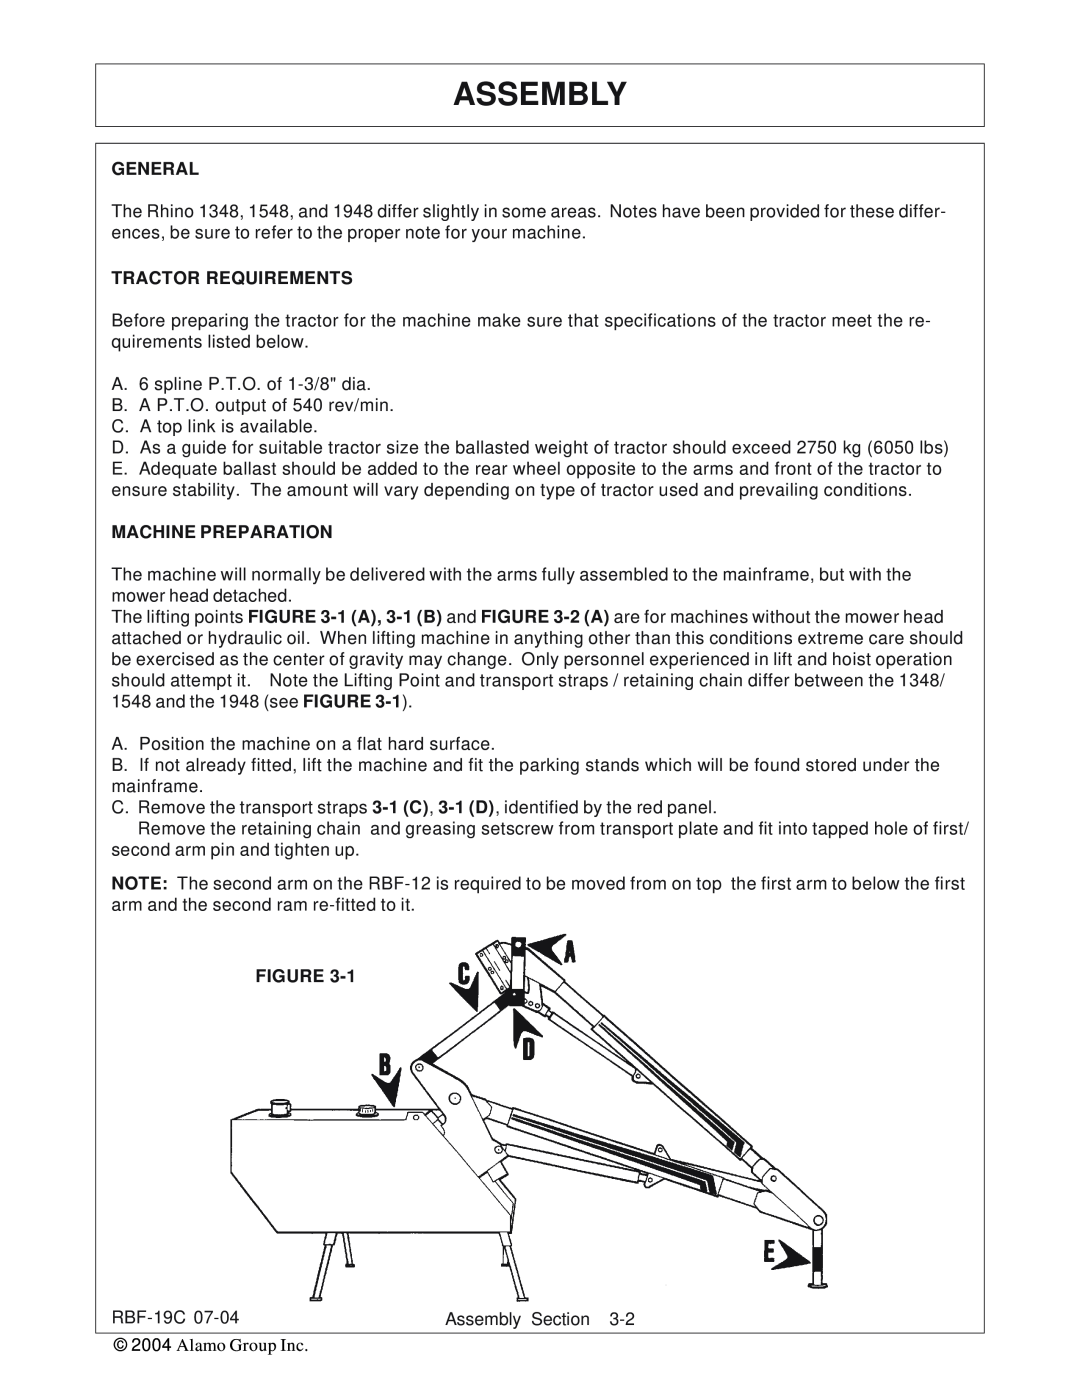 Tiger RBF-19C manual Assembly, General, Tractor Requirements, Machine Preparation, Figure 